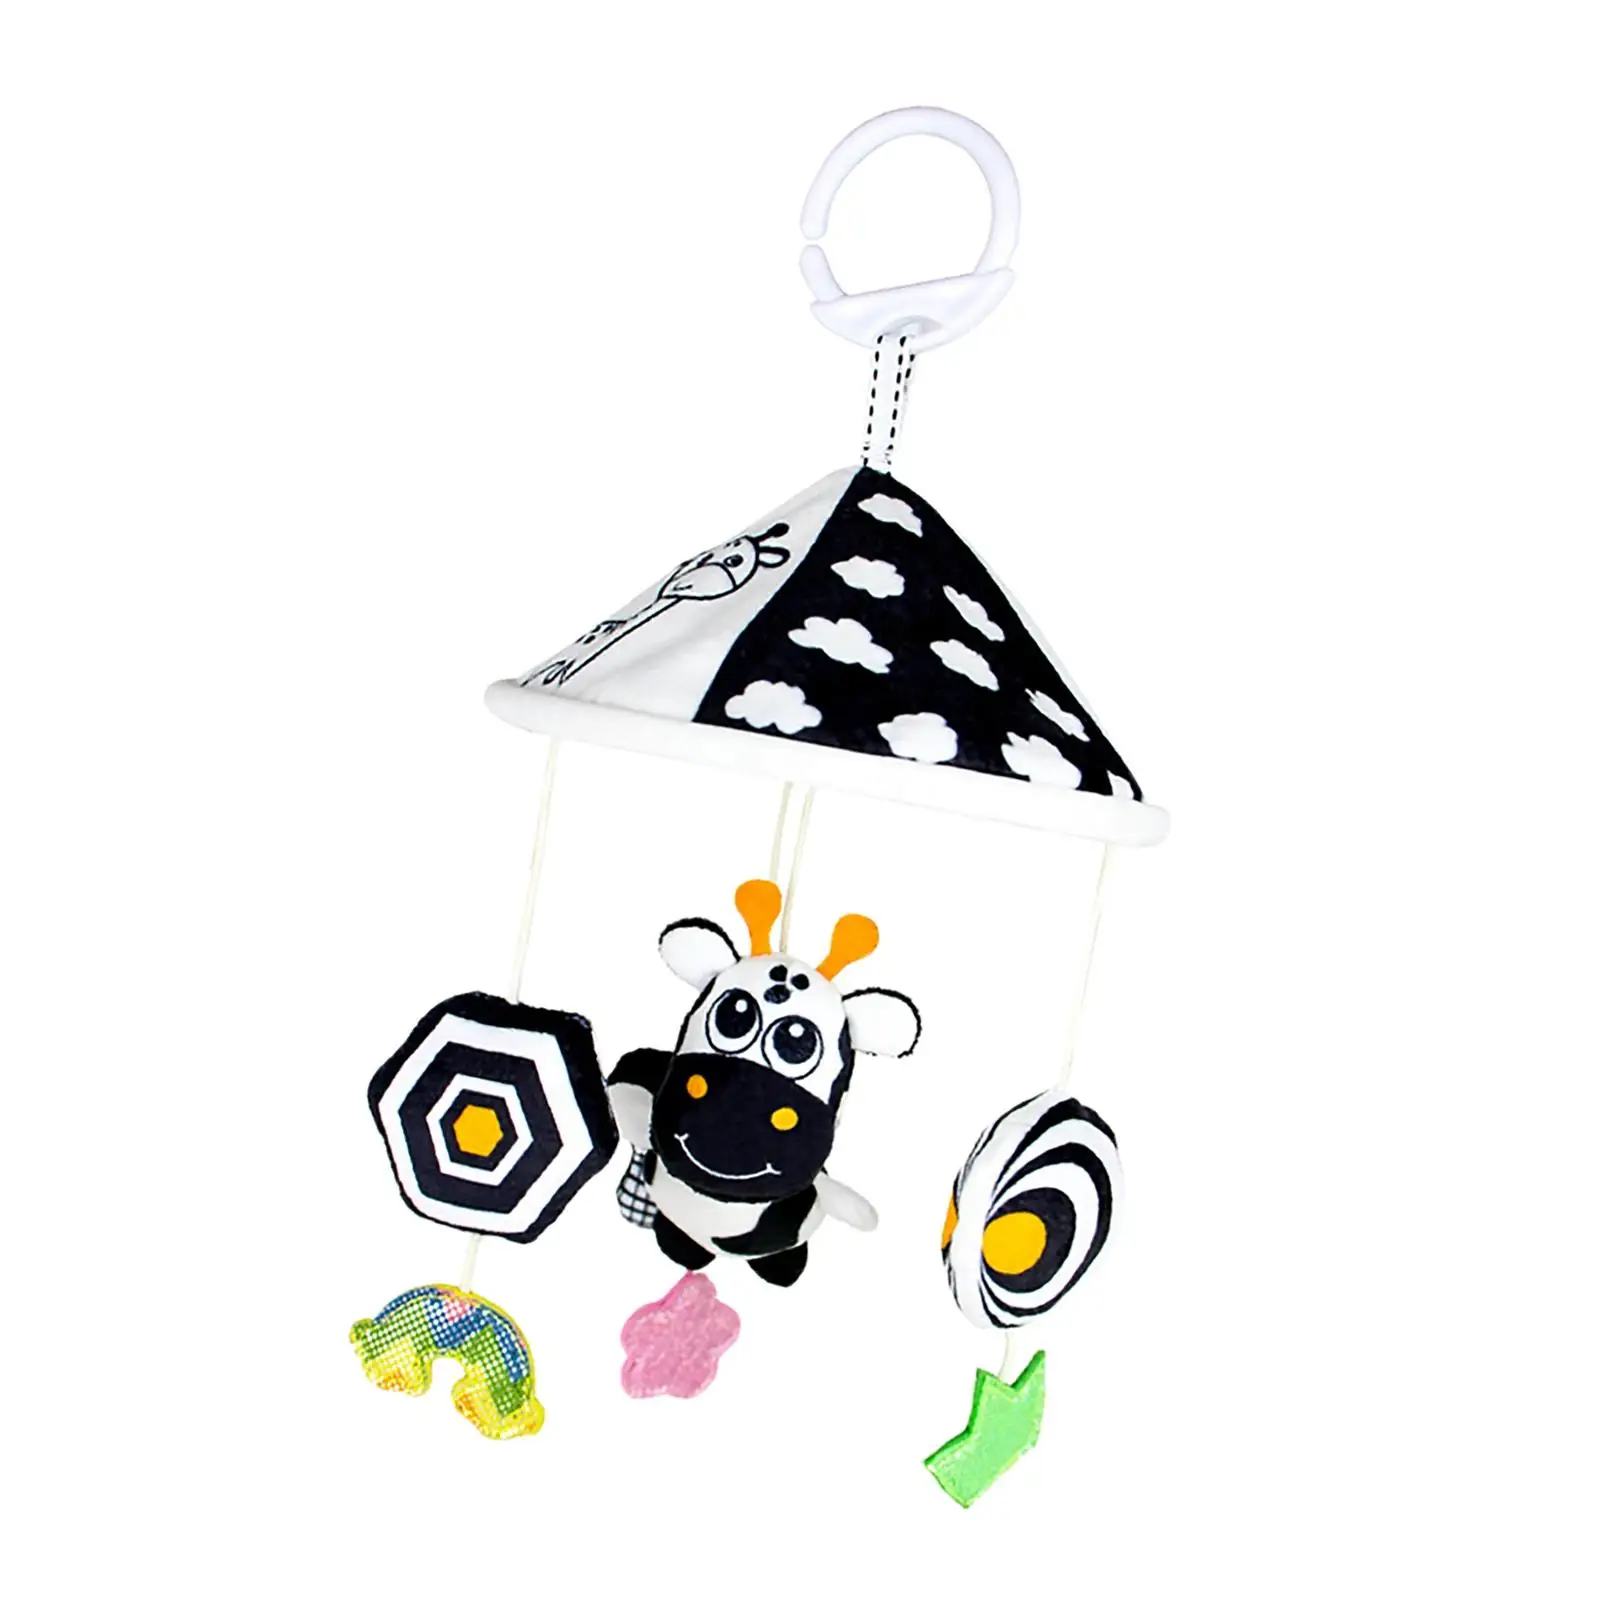 Baby Crib Mobile Hanging Black and White Baby Mobile for Newborn Kids Infant